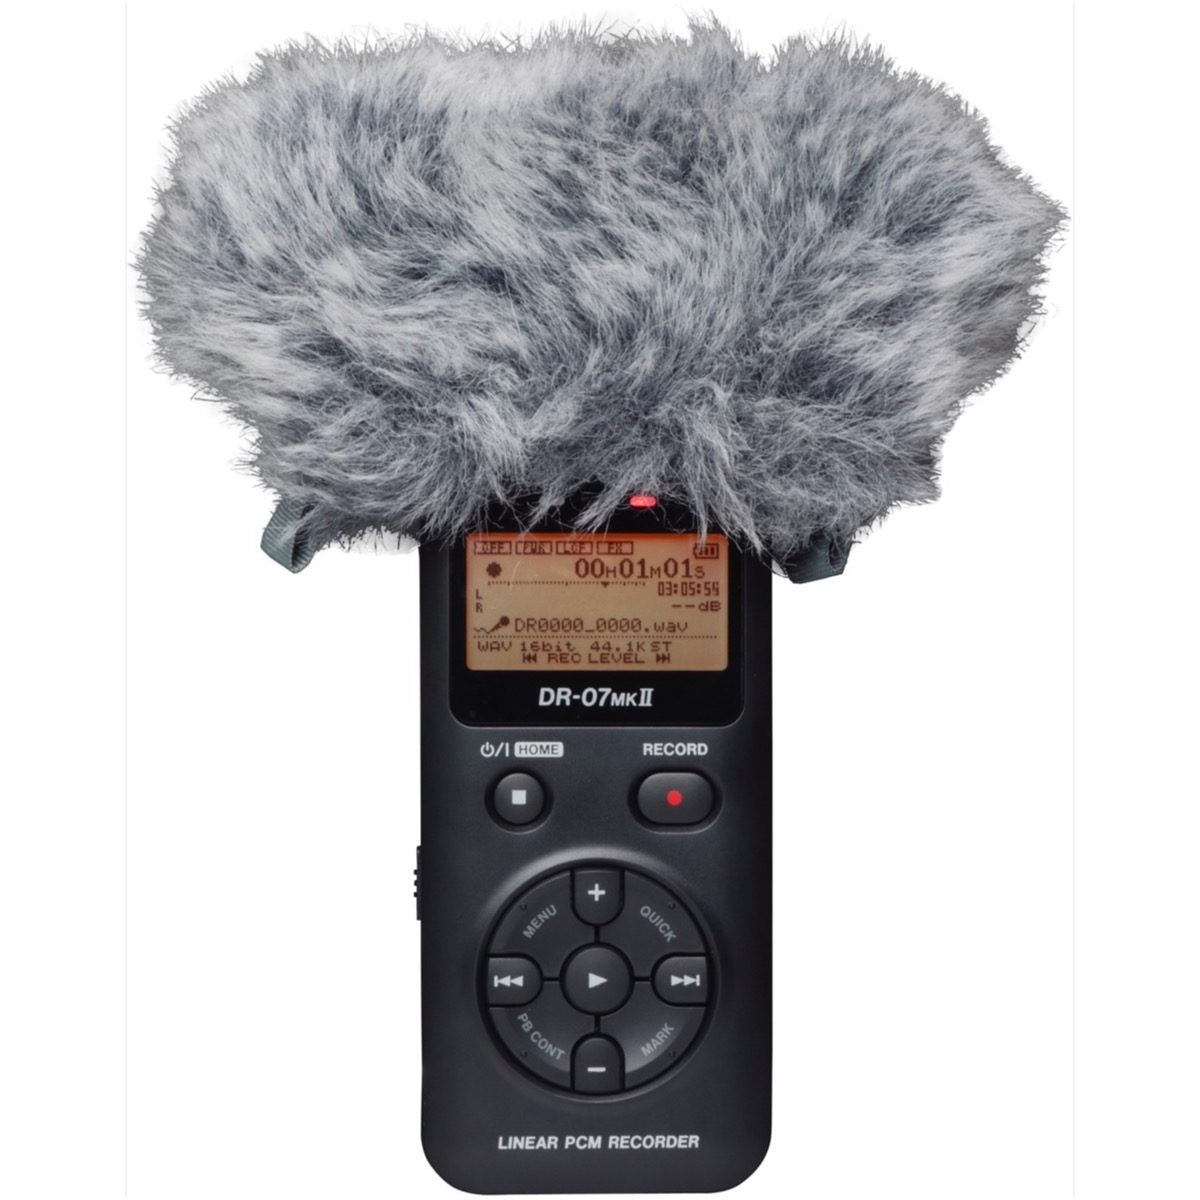 Tascam WS-11 Windscreen for DR-Series Handheld Recorders